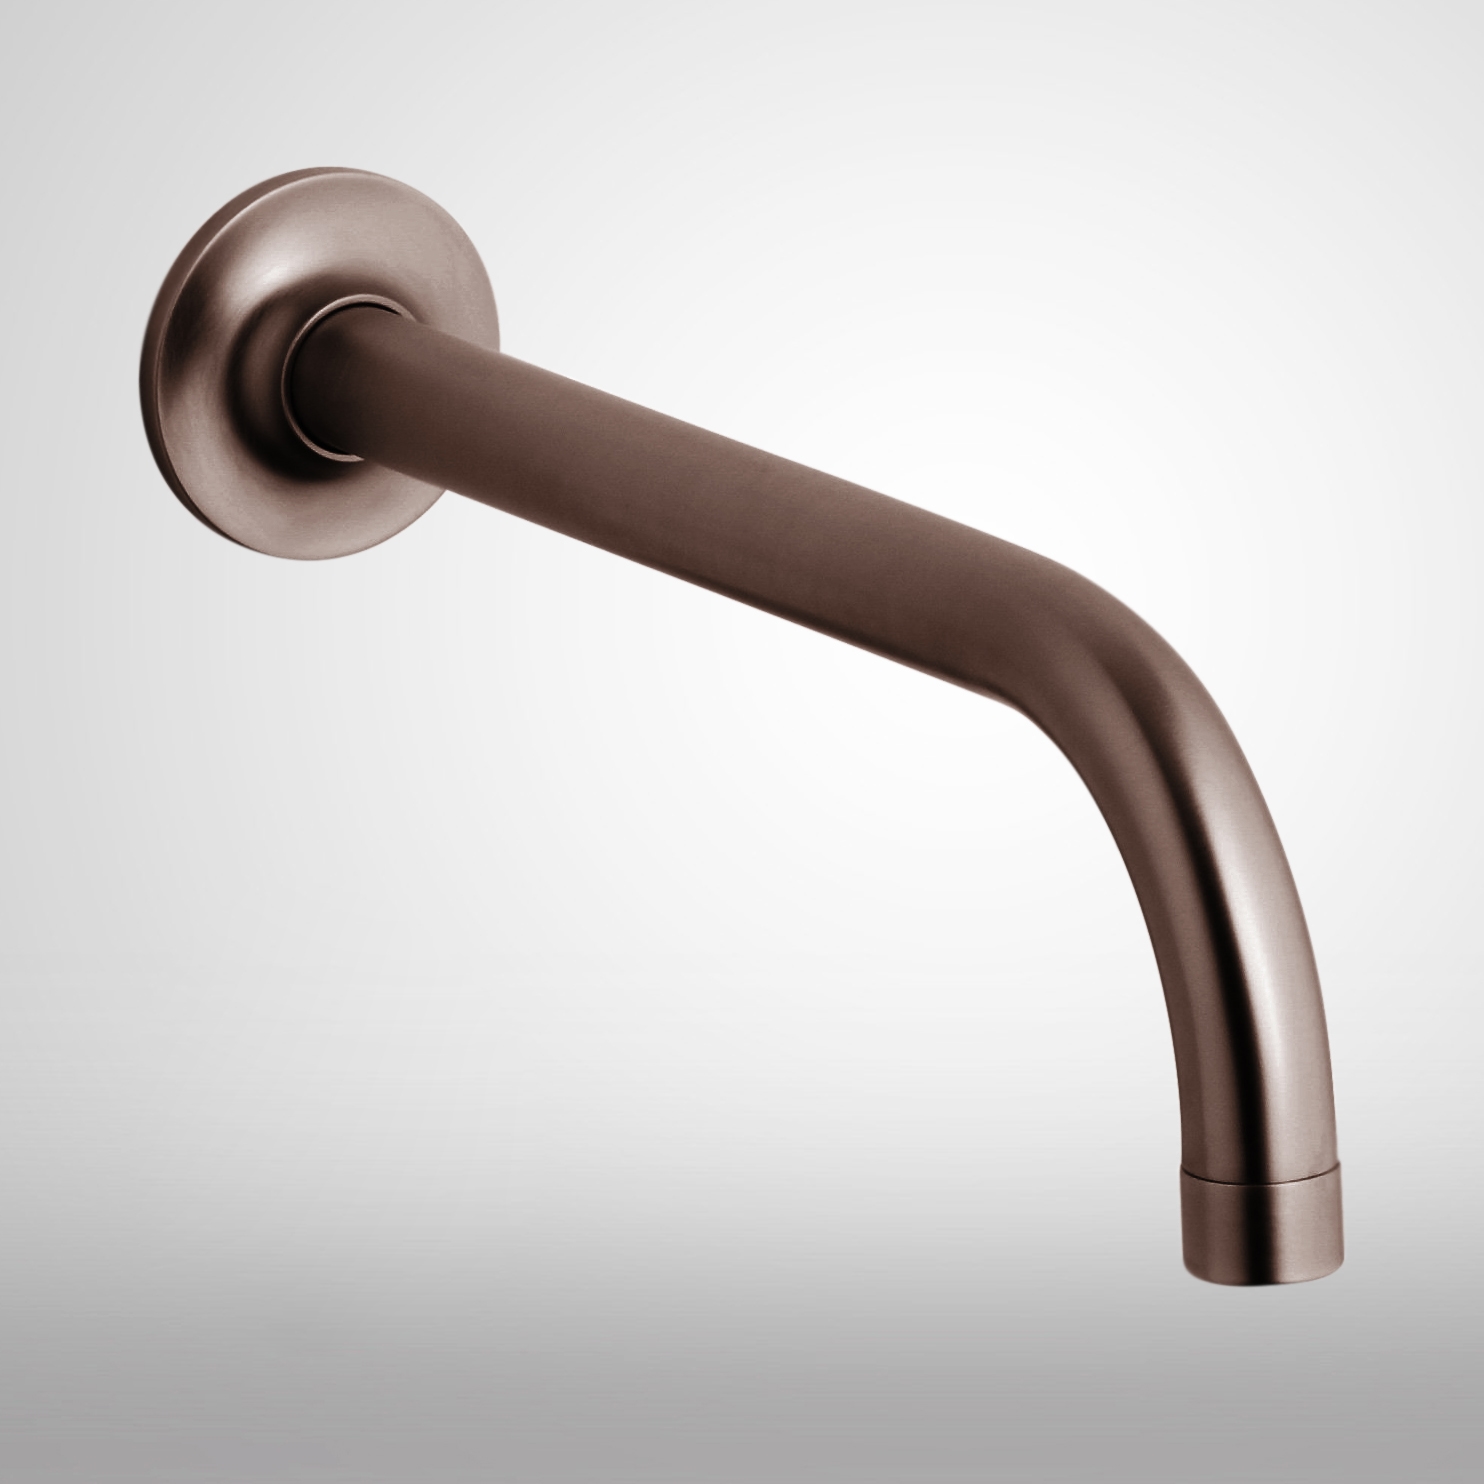 ANNAPOLIS WALL MOUNT SENSOR FAUCETS OIL RUBBED BRONZE FINISH